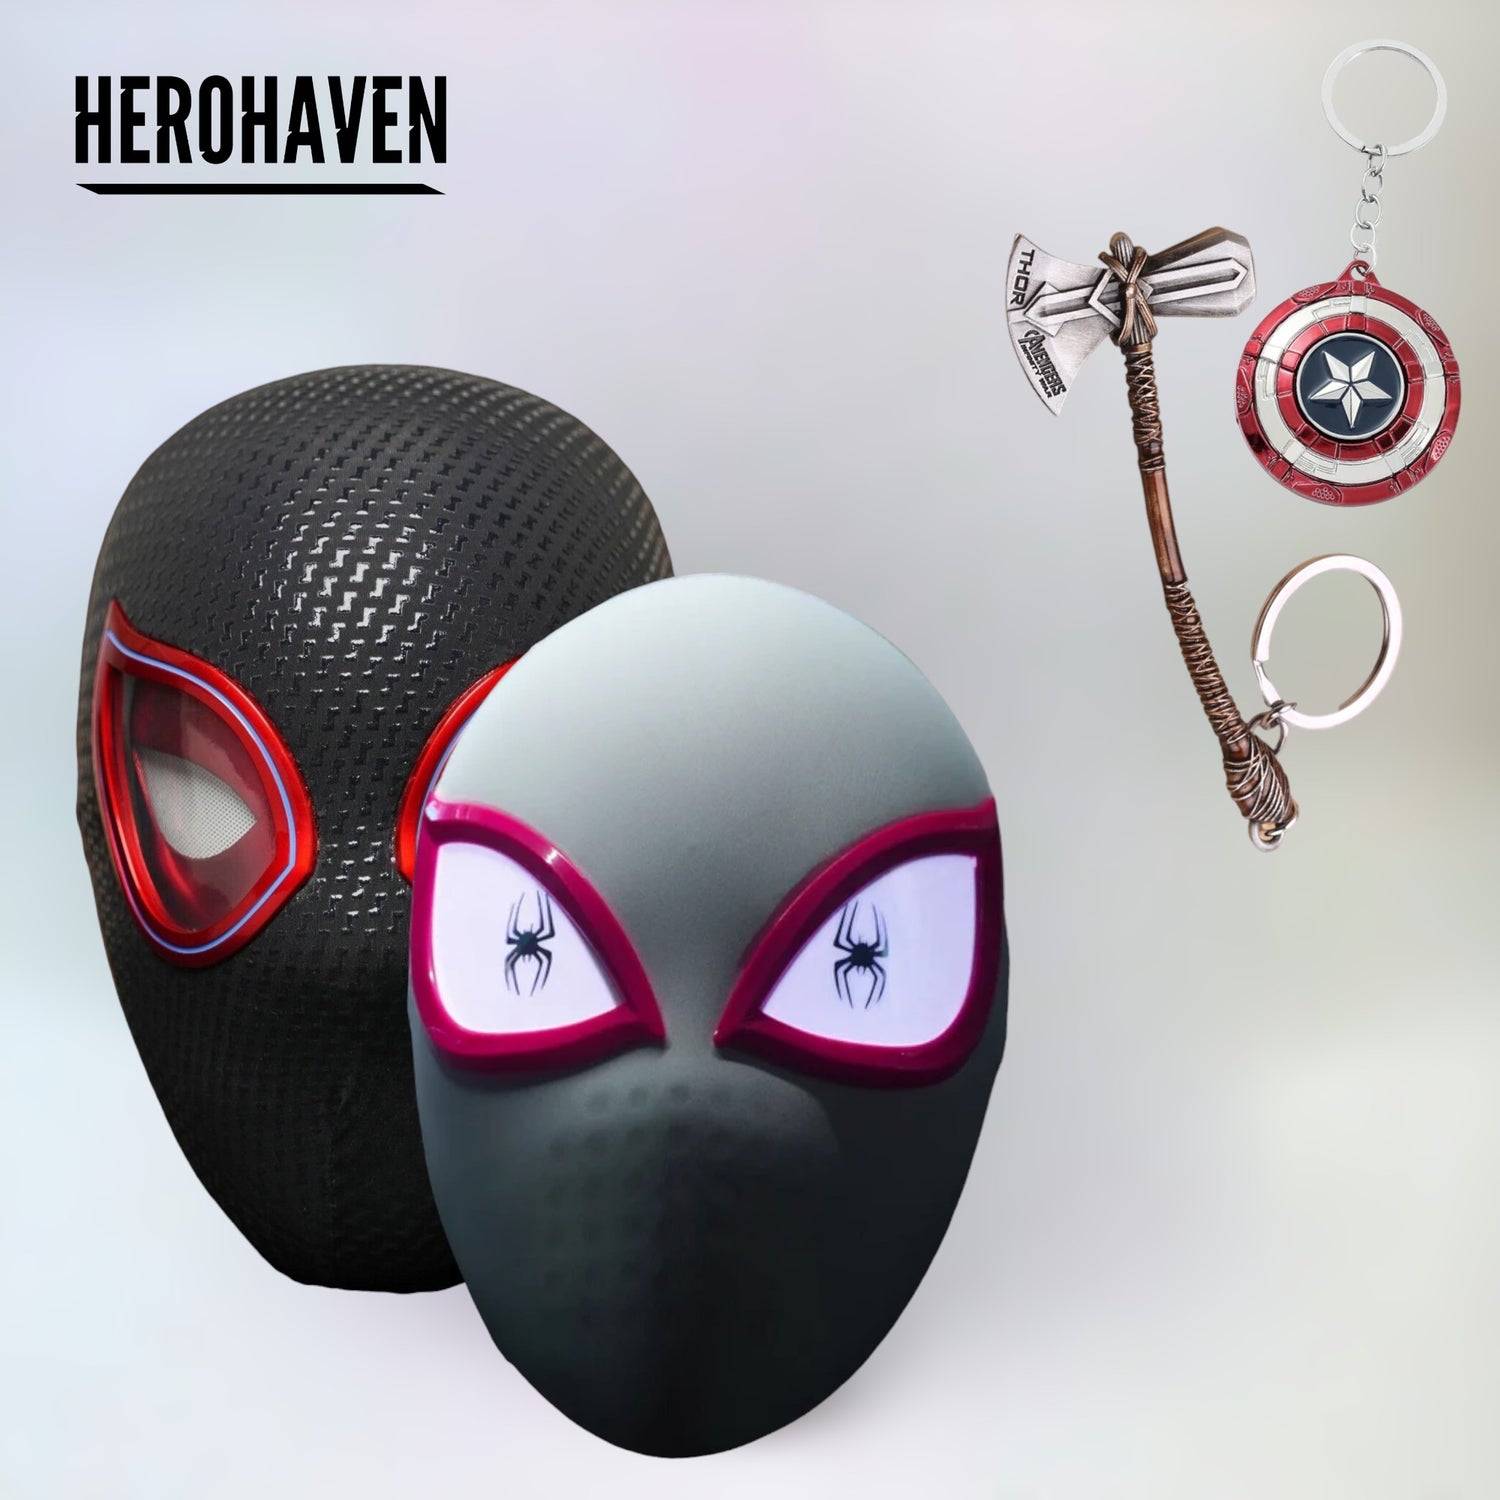 Herohaven Collections Masks Helmets Cosplay Keyrings Figurines